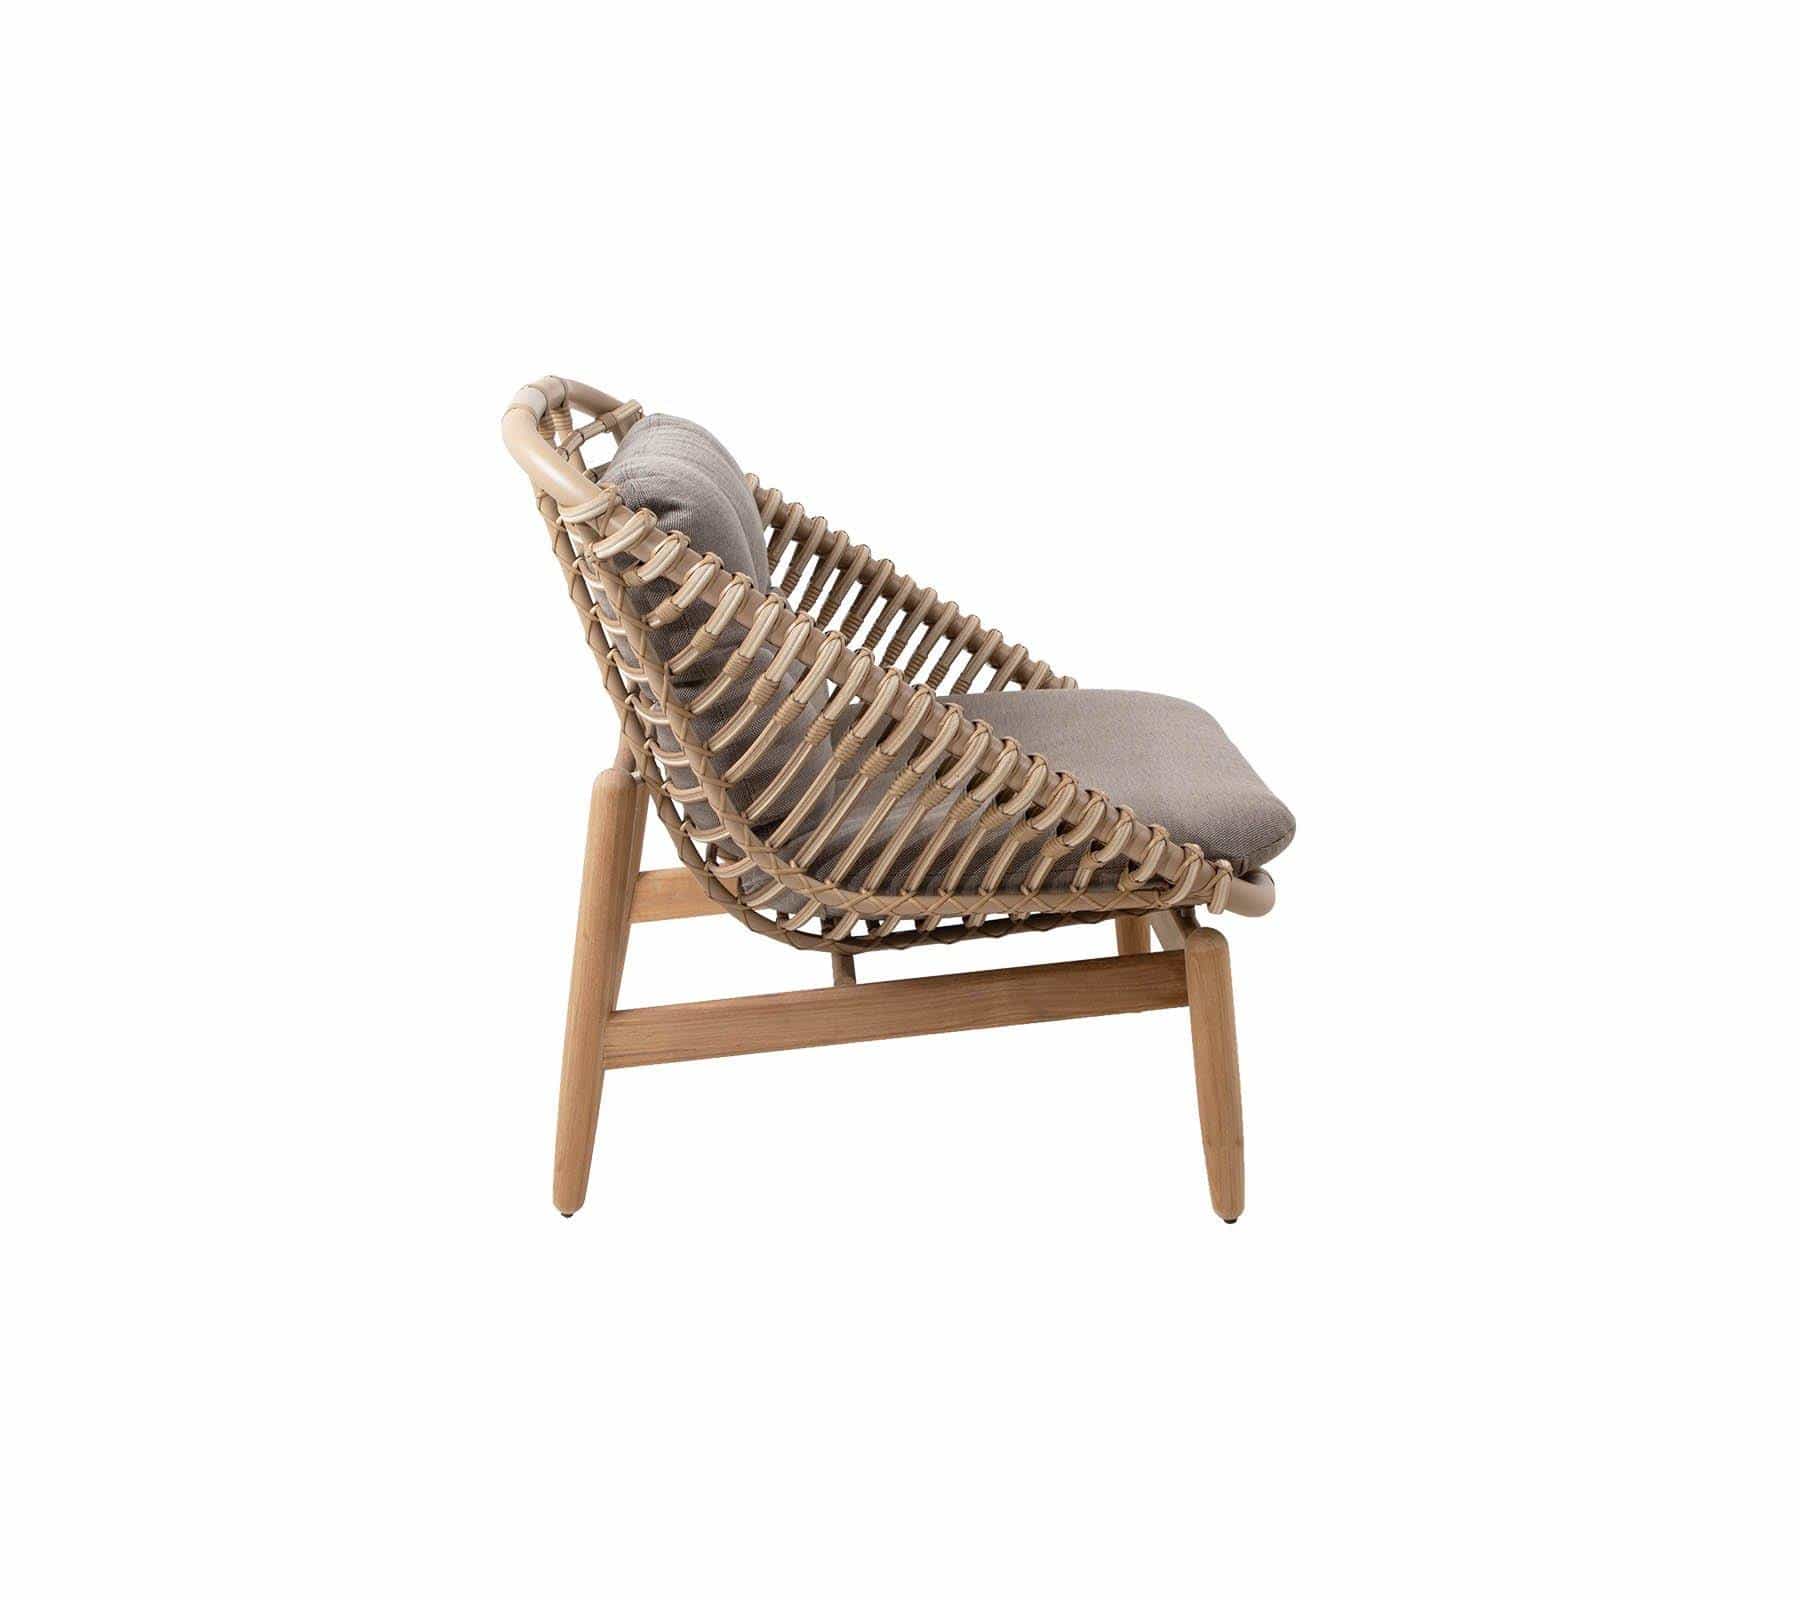 Cane-Line Denmark Outdoor Chairs String lounge chair w/teak frame, incl. Cane-line AirTouch cushions, Cane-line Weave-54020